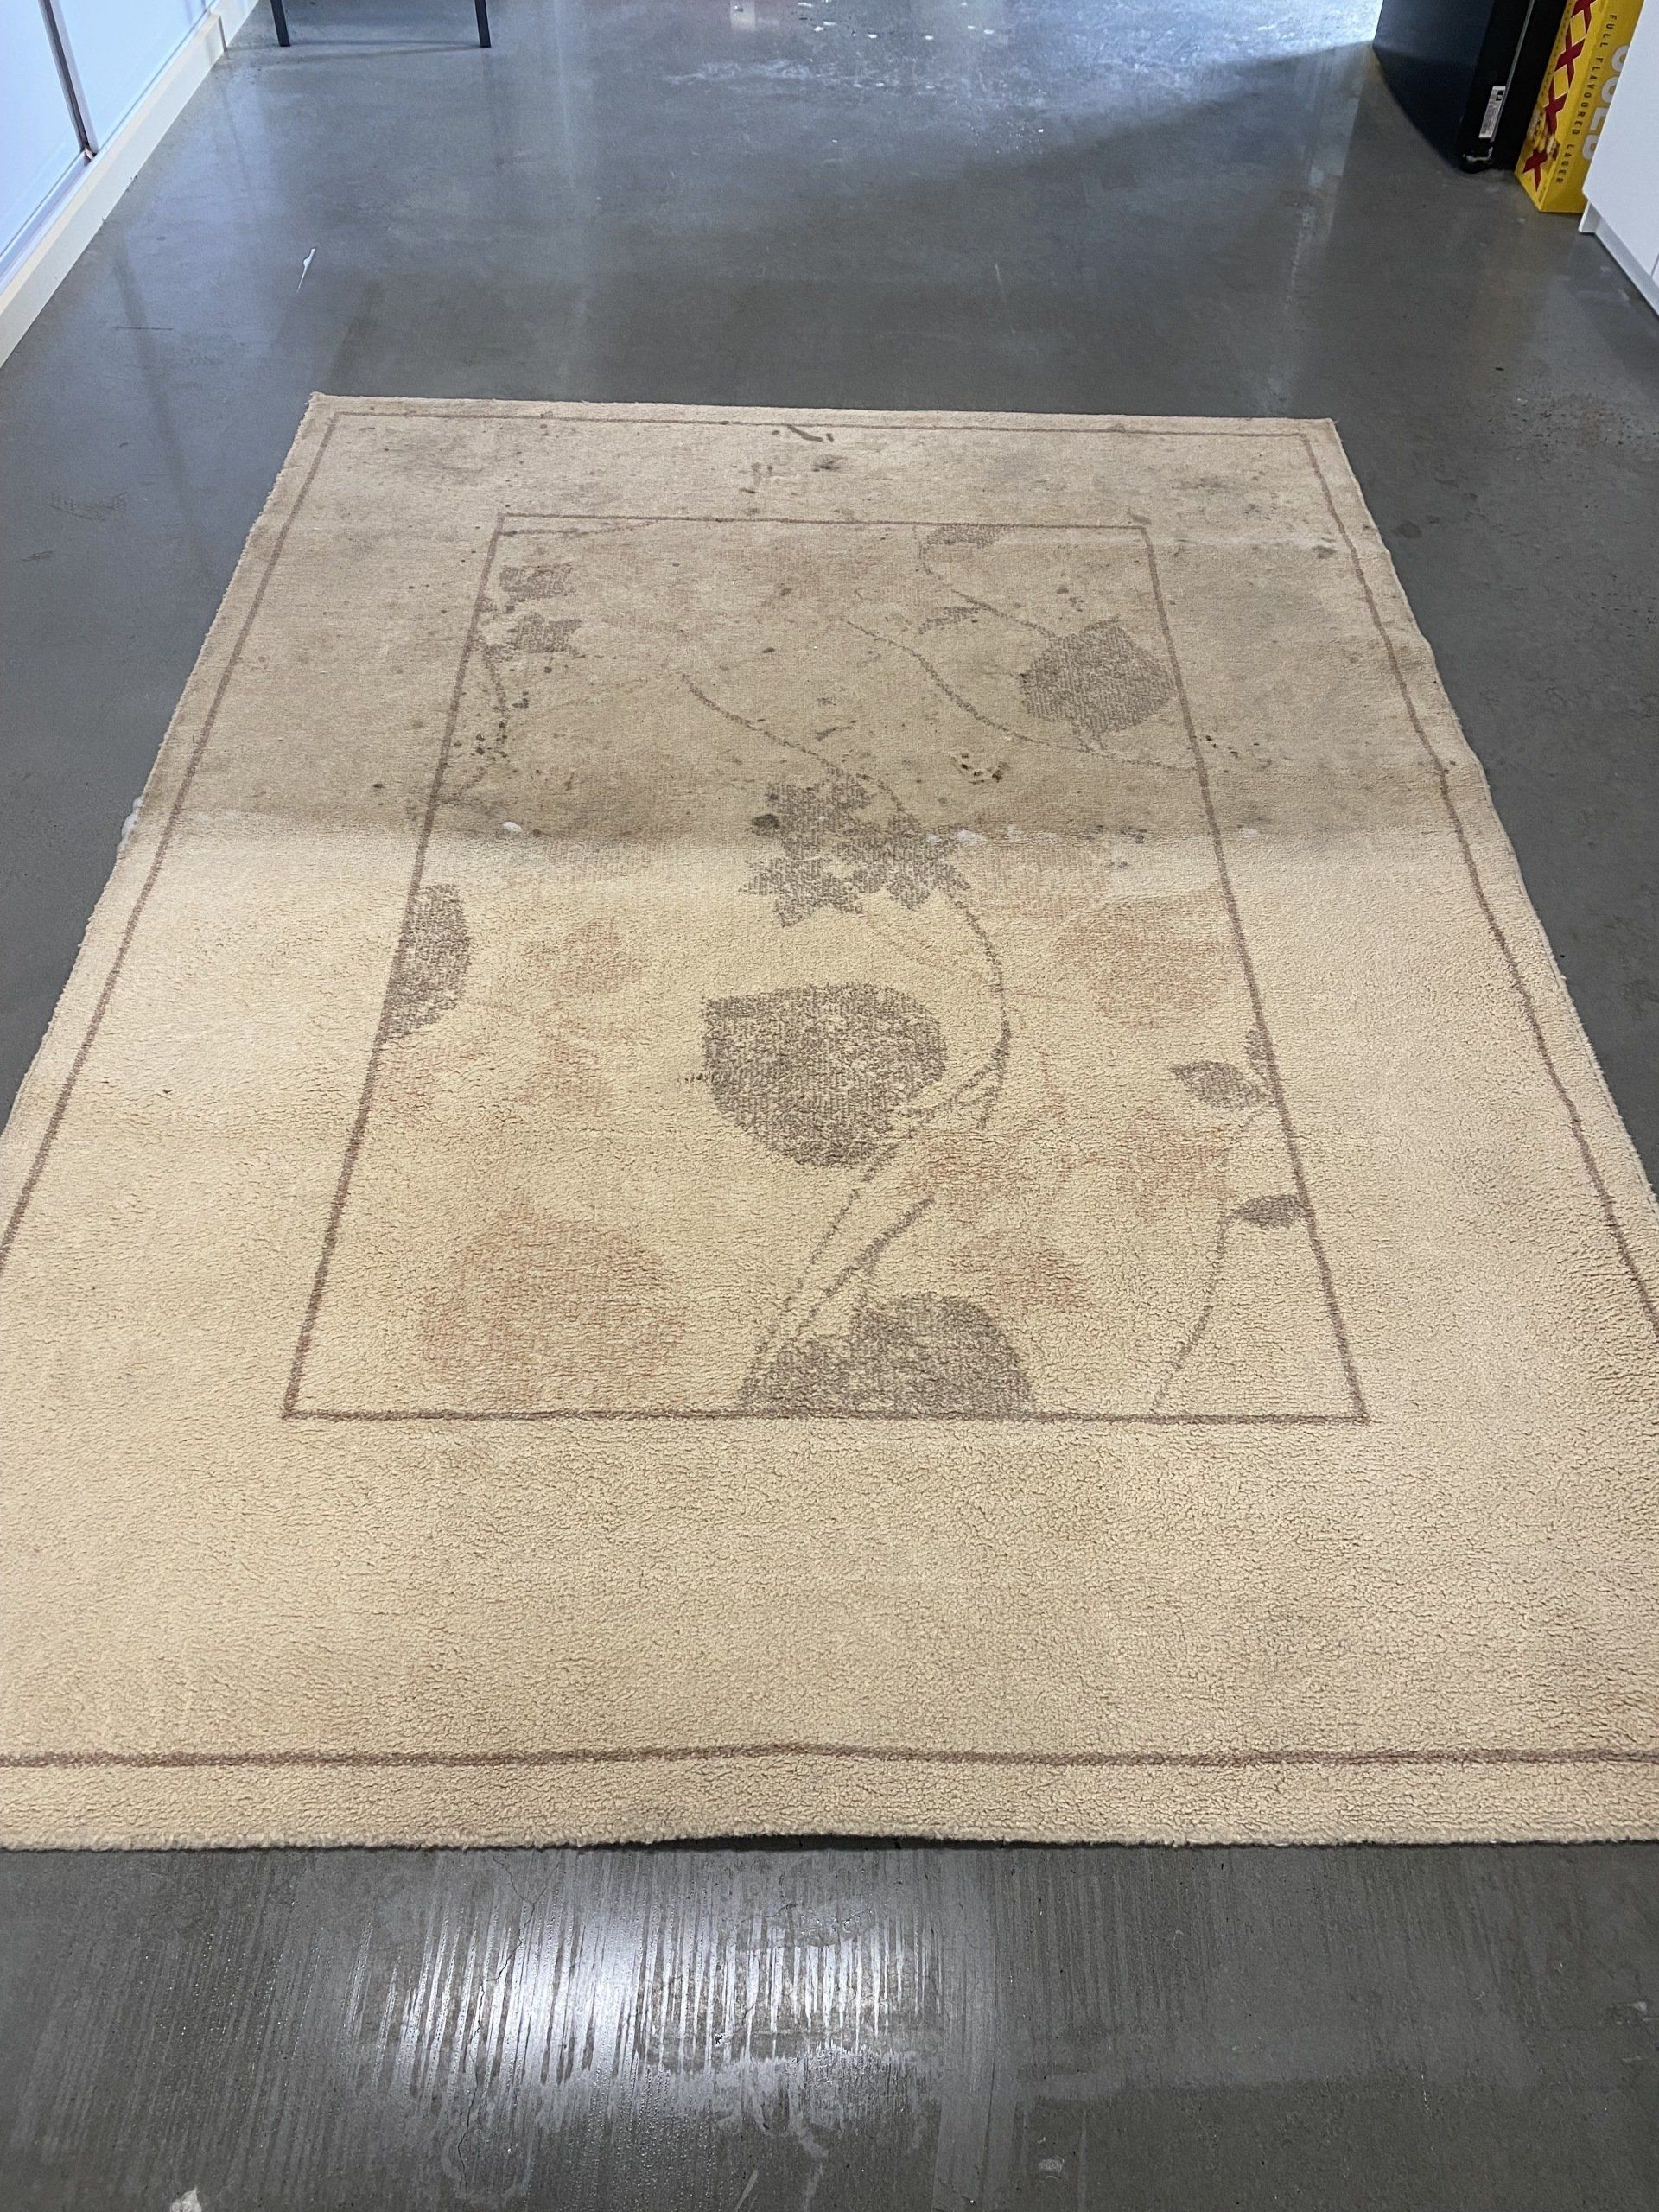 Dirty Rug for Cleaning Process